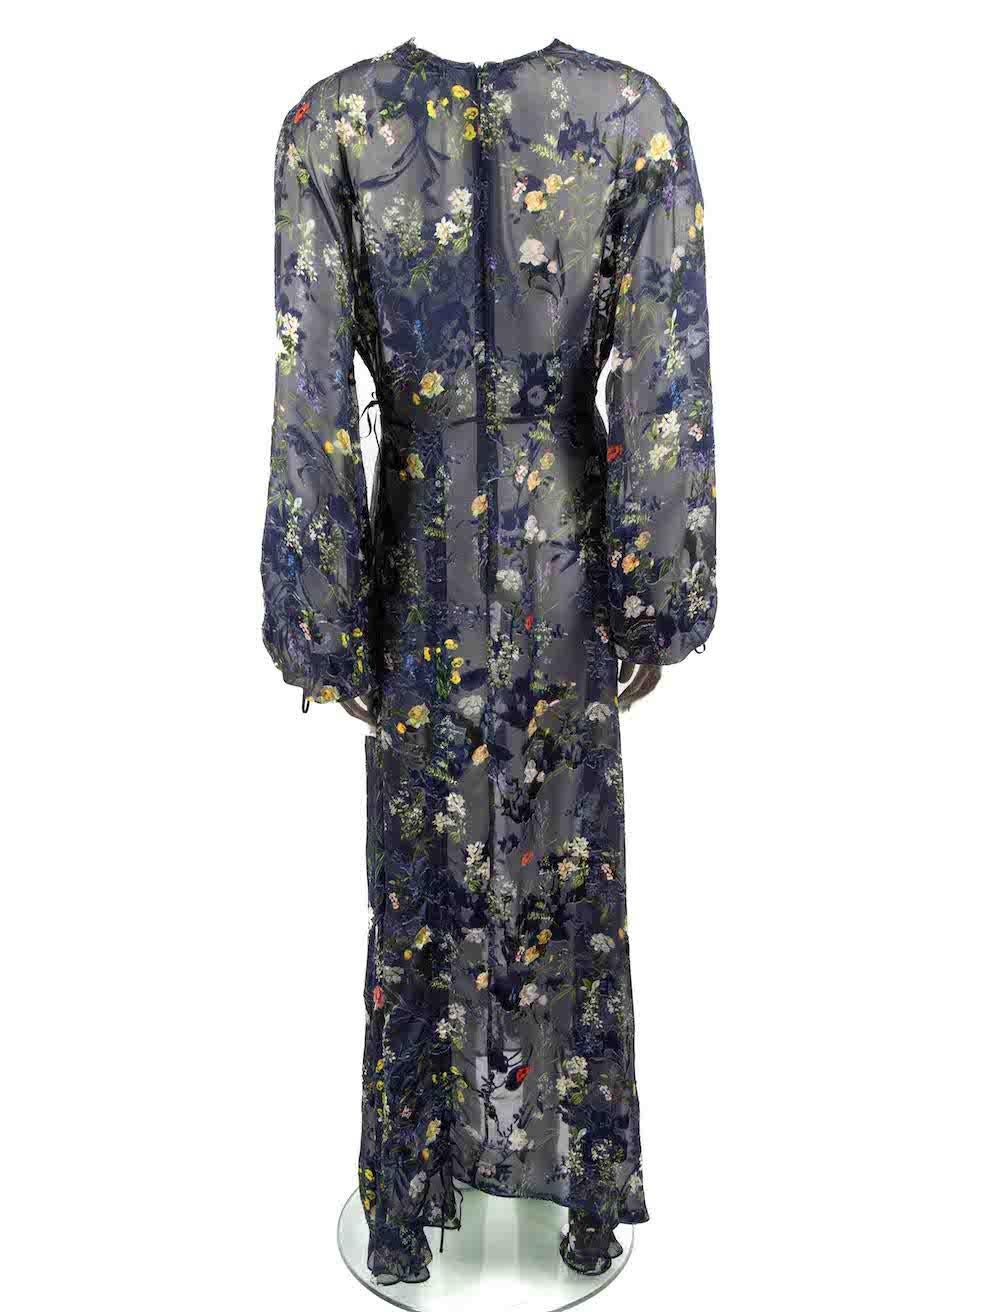 Preen By Thornton Bregazzi Floral Print V Neck Maxi Dress Size S In Good Condition For Sale In London, GB